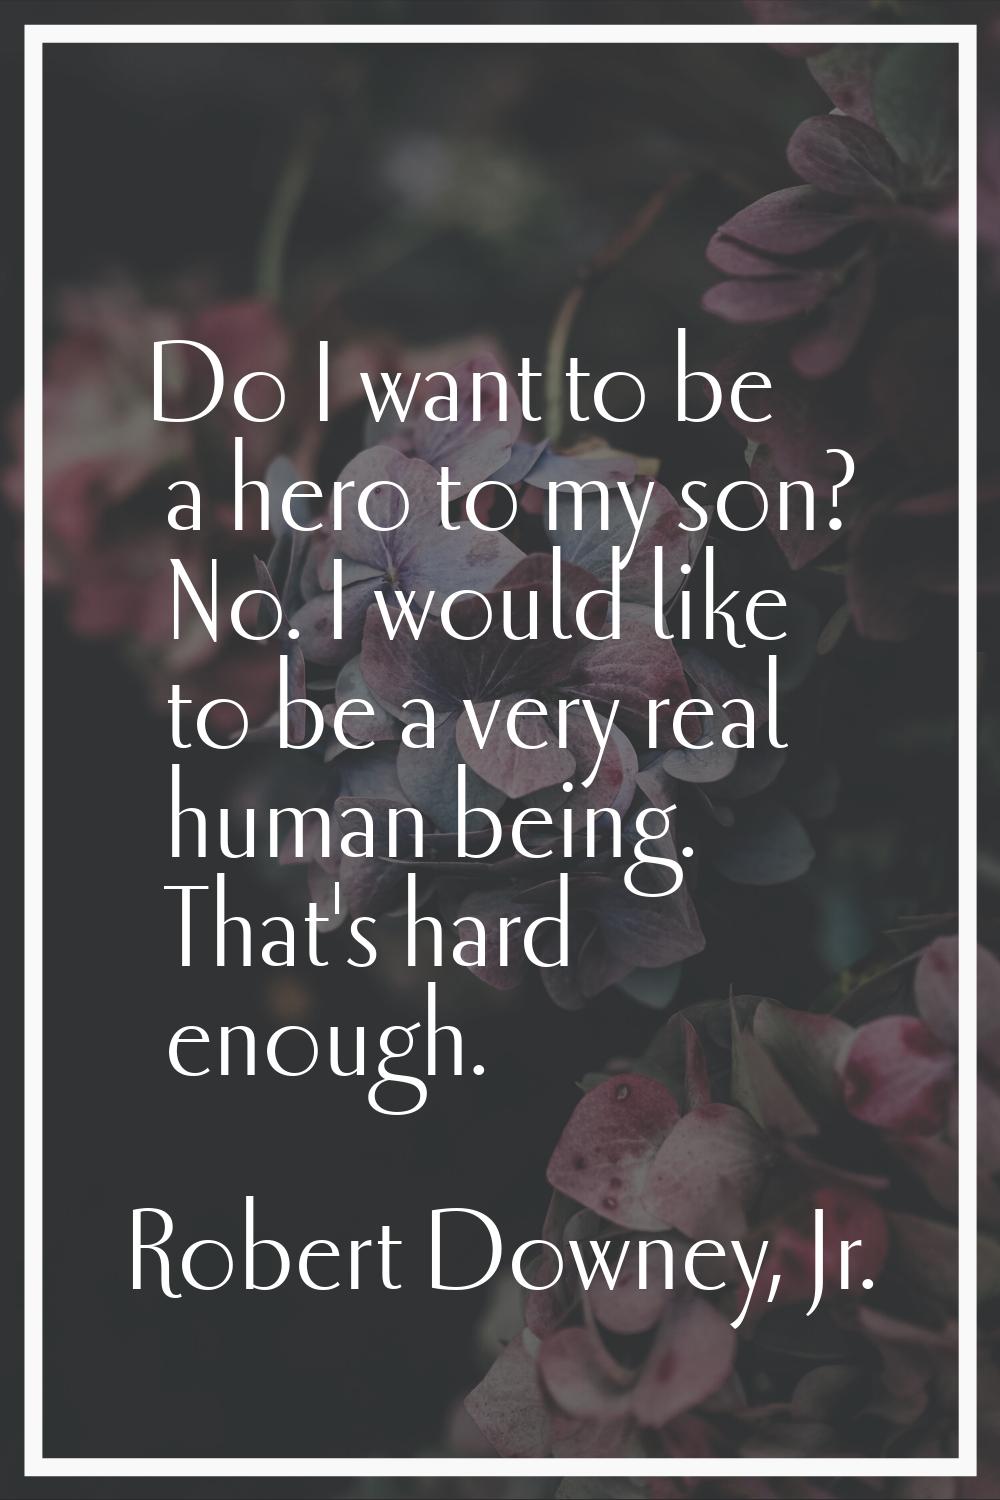 Do I want to be a hero to my son? No. I would like to be a very real human being. That's hard enoug